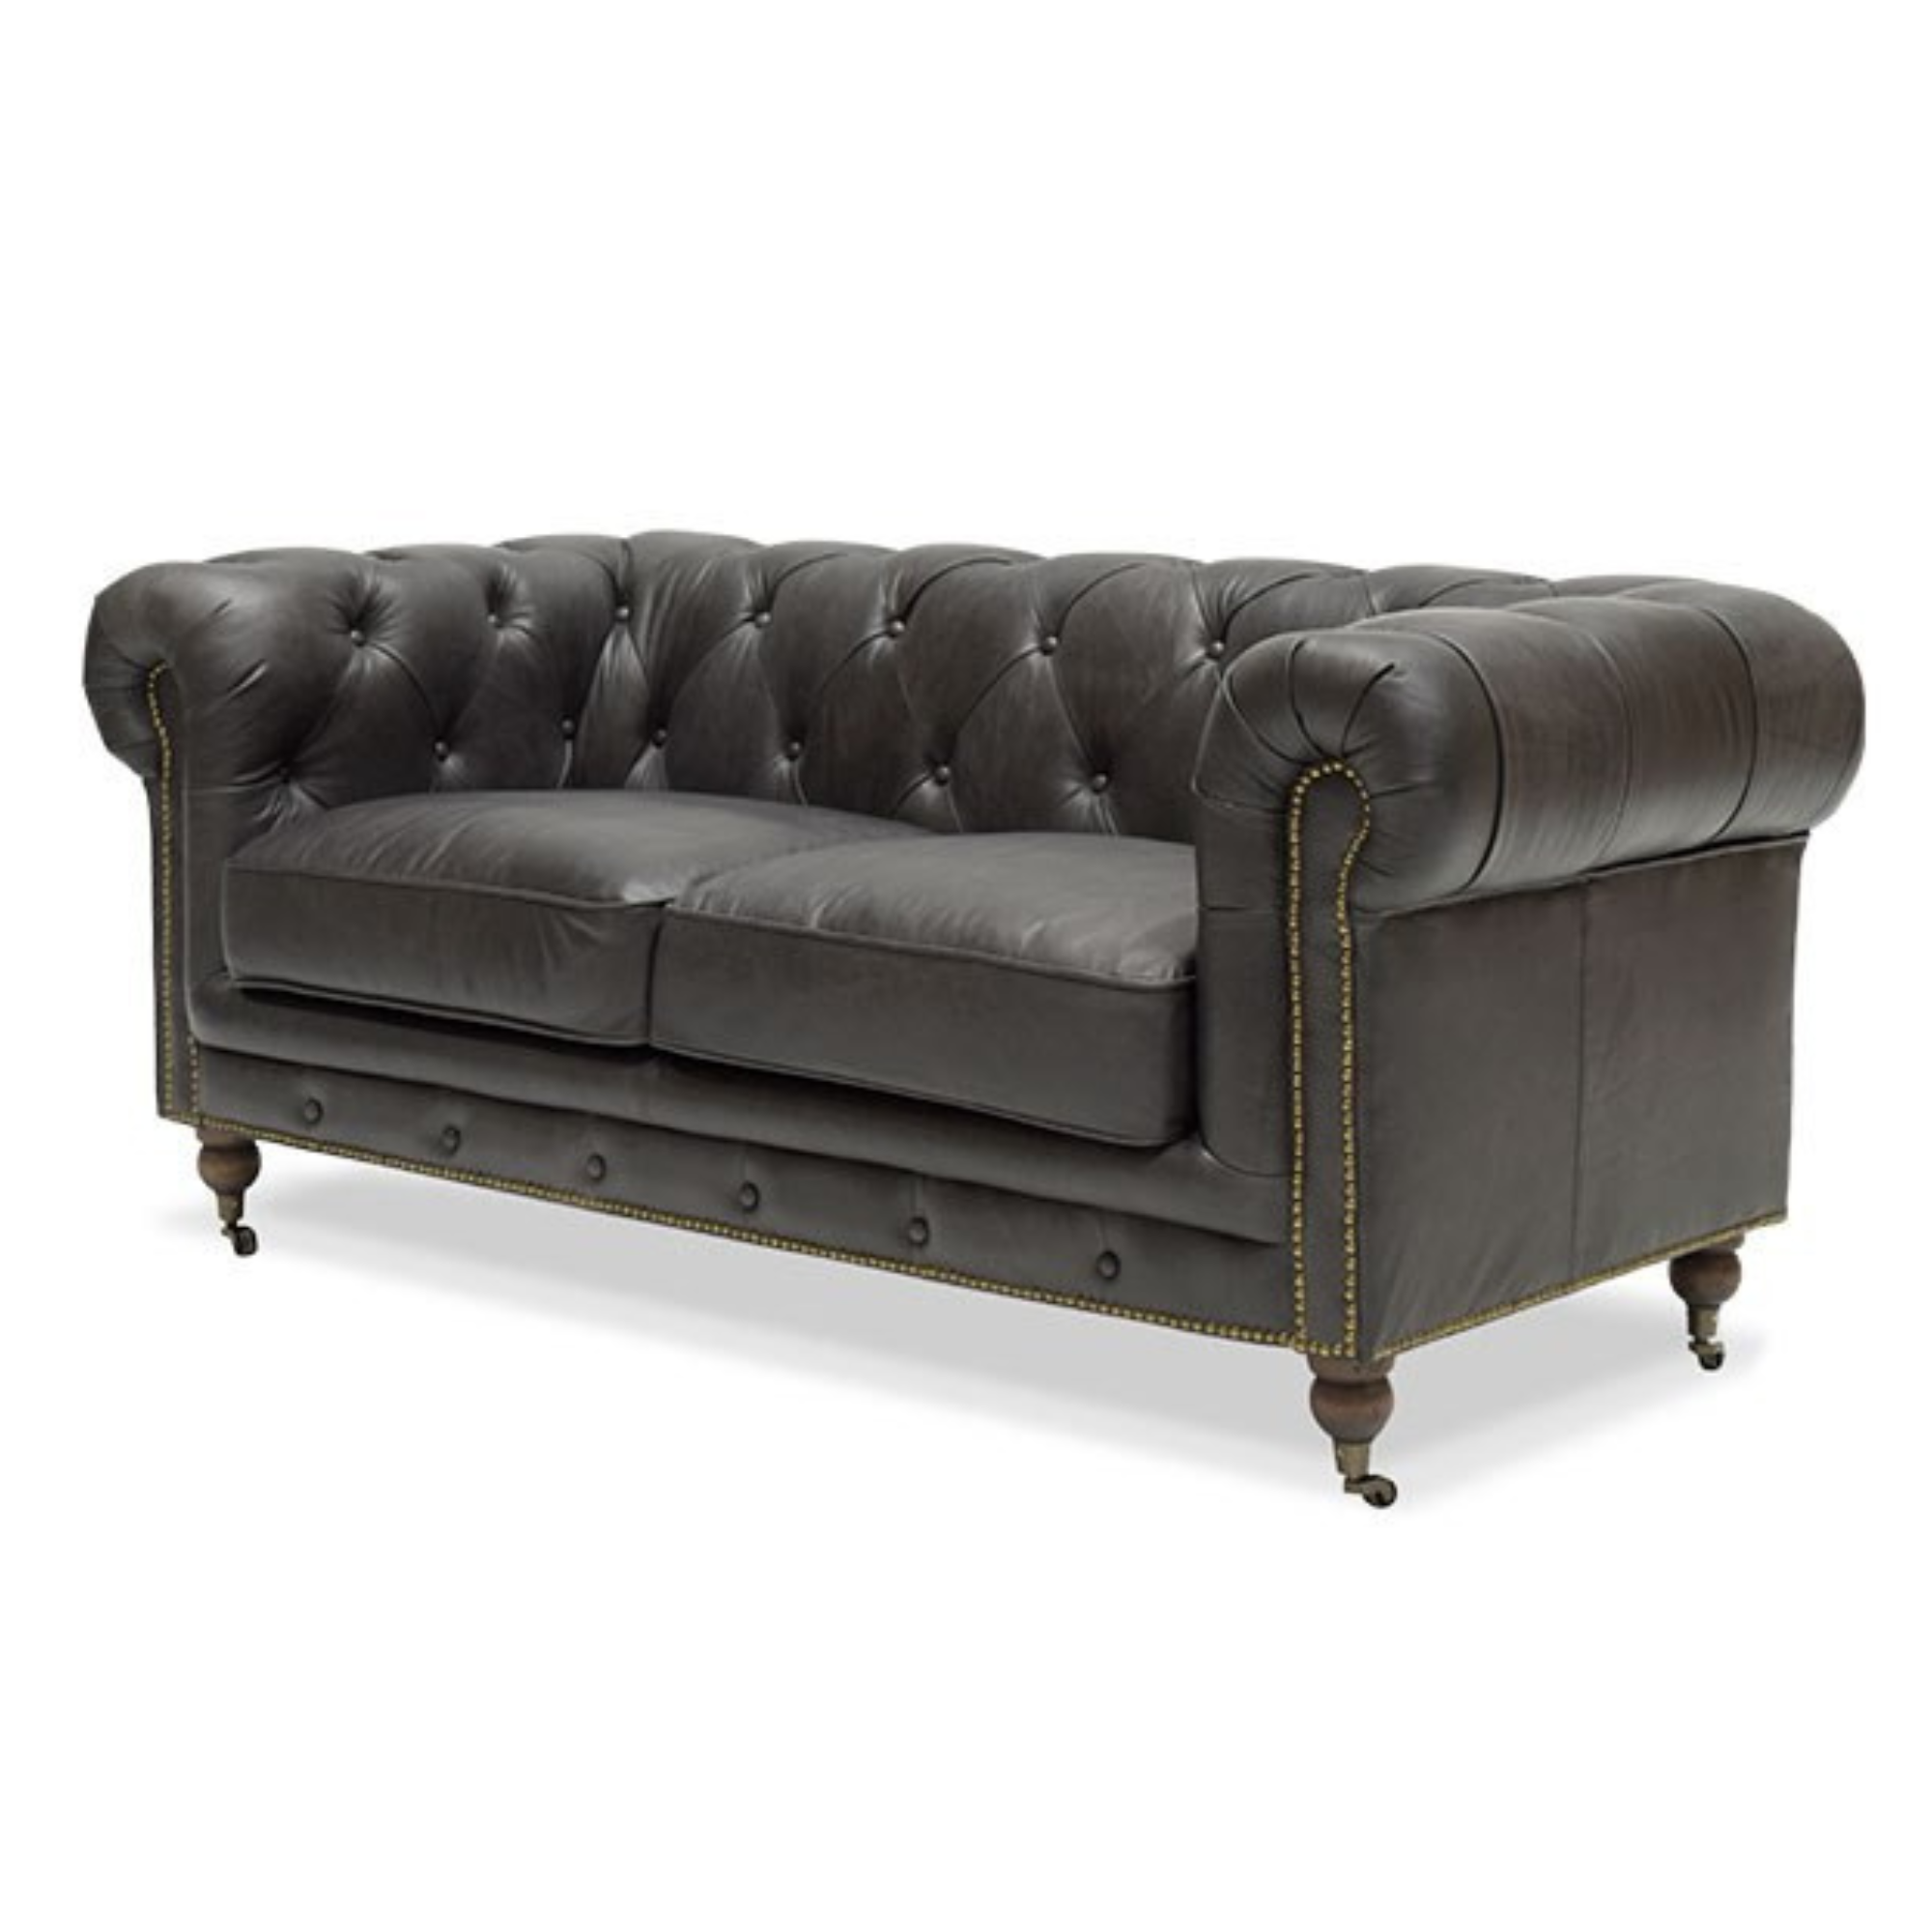 STANHOPE LEATHER 2 SEATER CHESTERFIELD